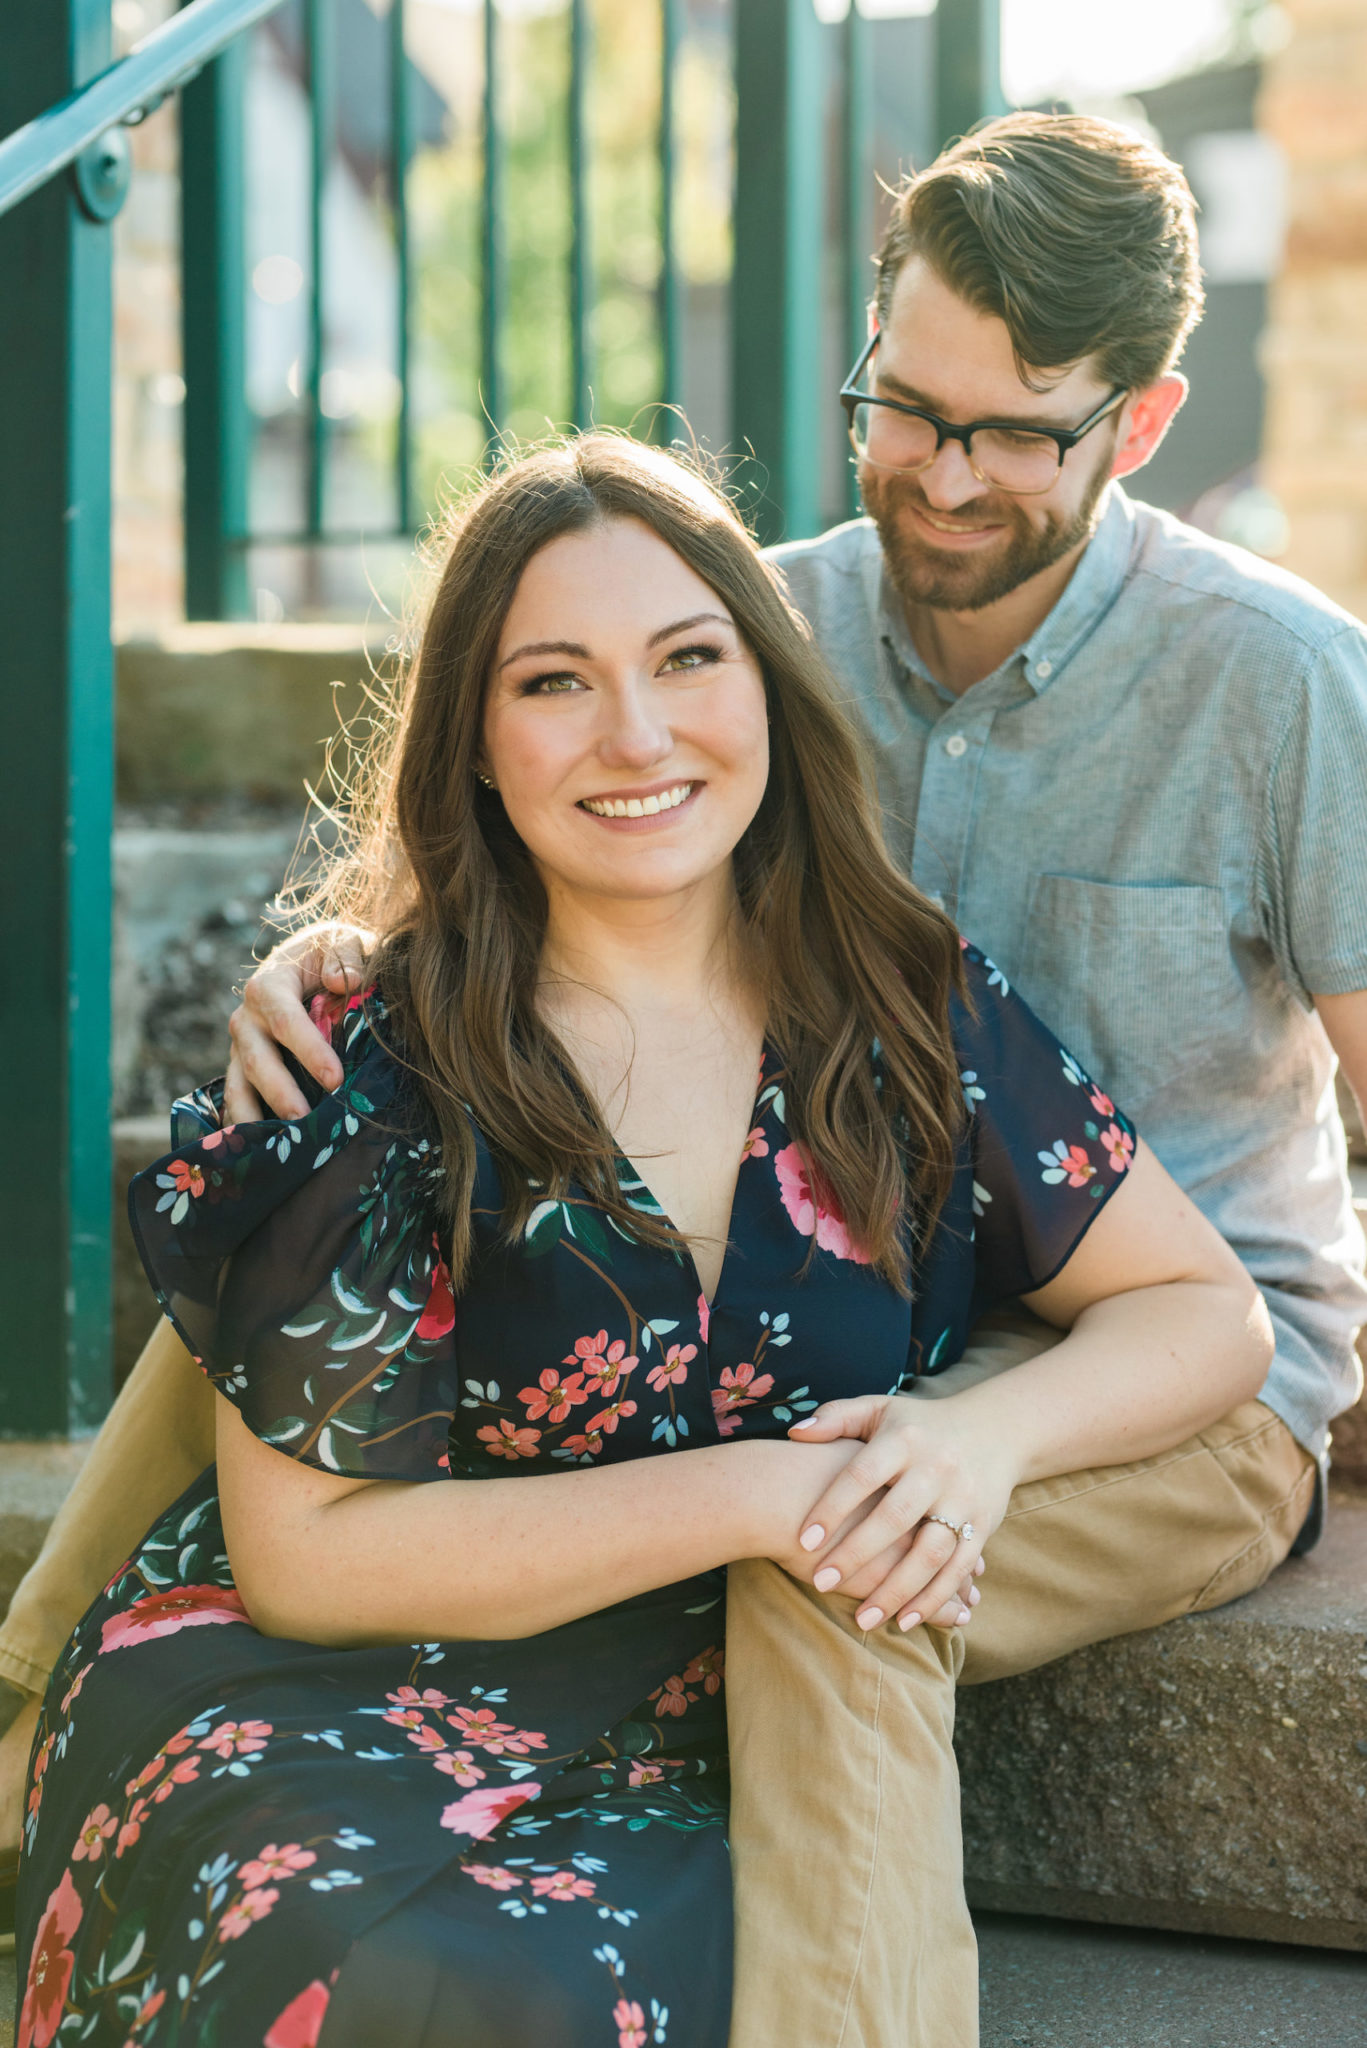 A portrait of a couple sitting on stones and smiling at the camera.